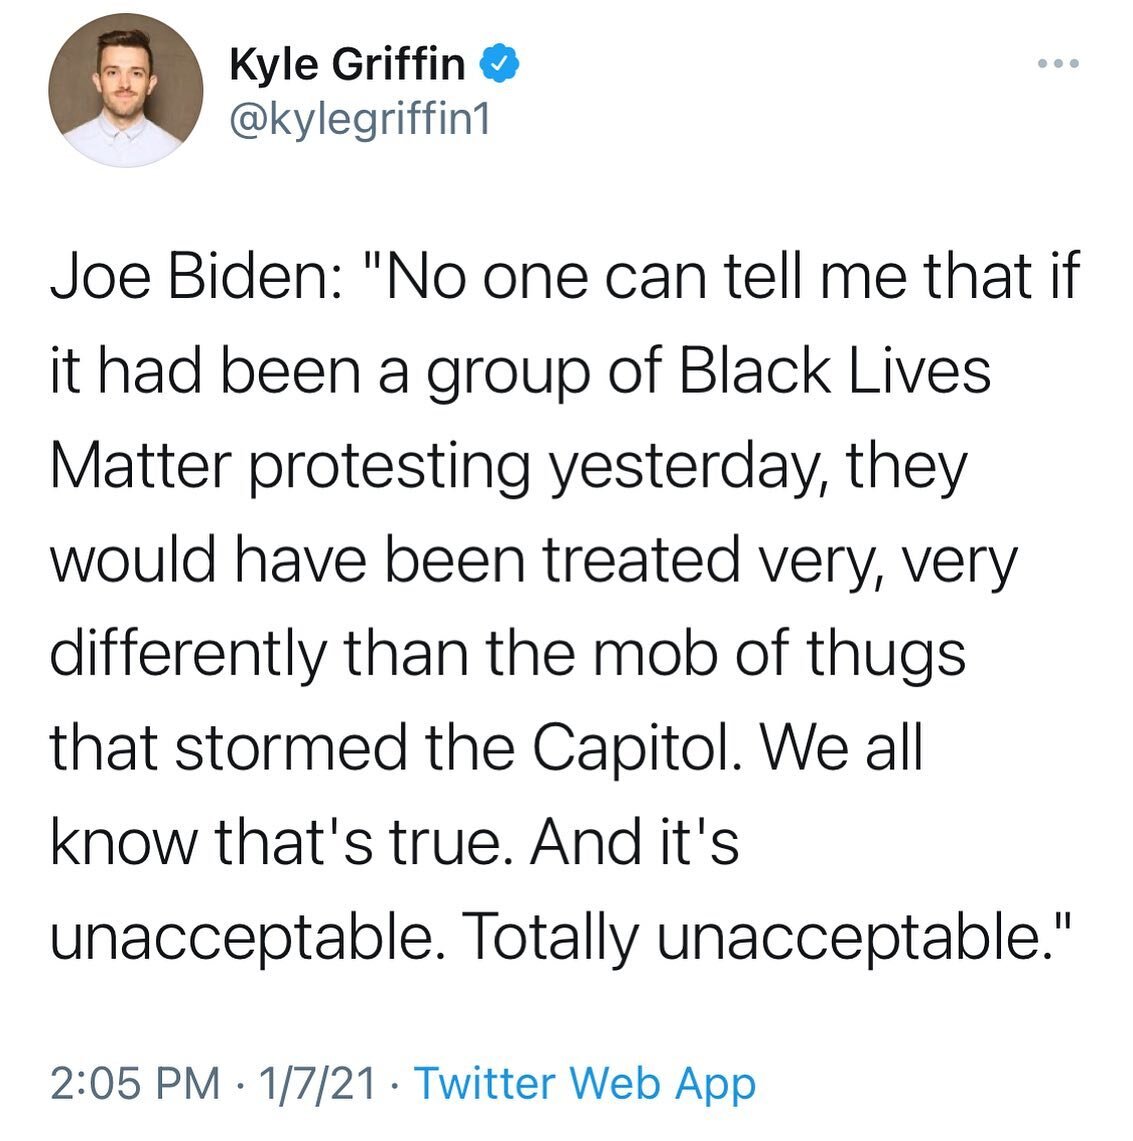 &ldquo;No one can tell me that if it had been a group of Black Lives Matter protesting yesterday, they would have been treated very, very differently than the mob of thugs that stormed the Capitol. We all know that's true. And it's unacceptable. Tota